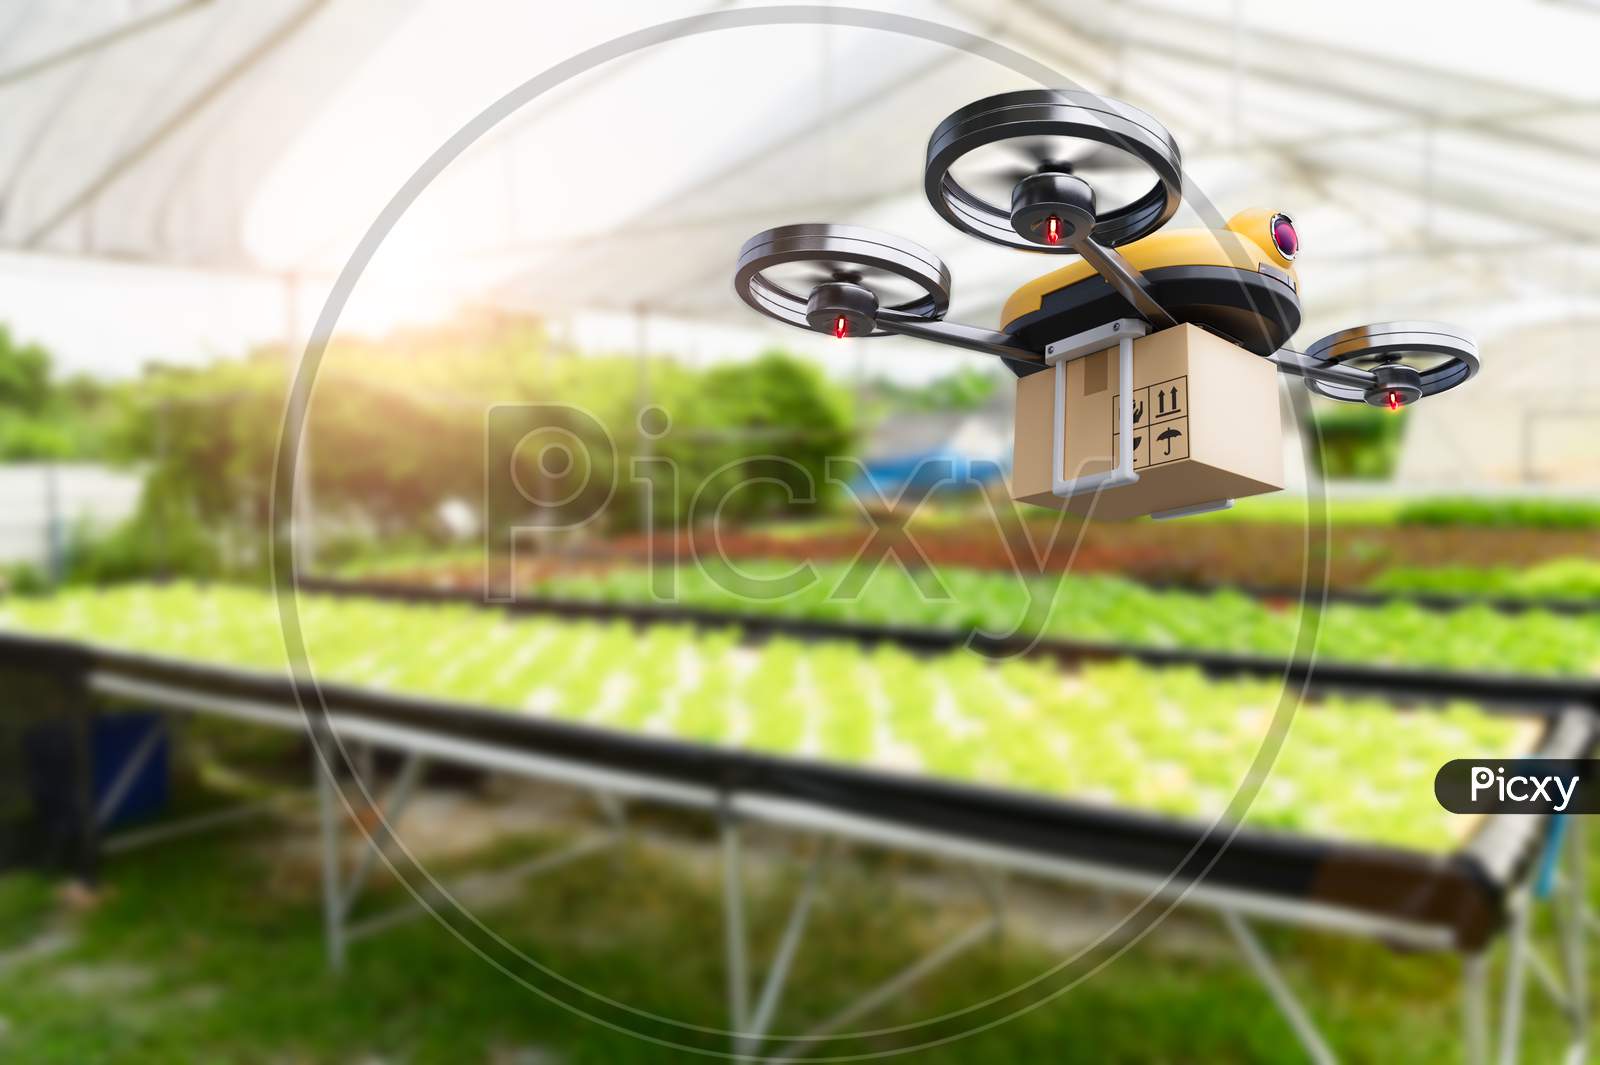 Hydroponics Vegetables Farming Drone At Indoors Modern Farm Background. Service For Delivery Shipping Healthy Organic Product And Goods To Customer. Business And Farming Innovative Technology Gadget